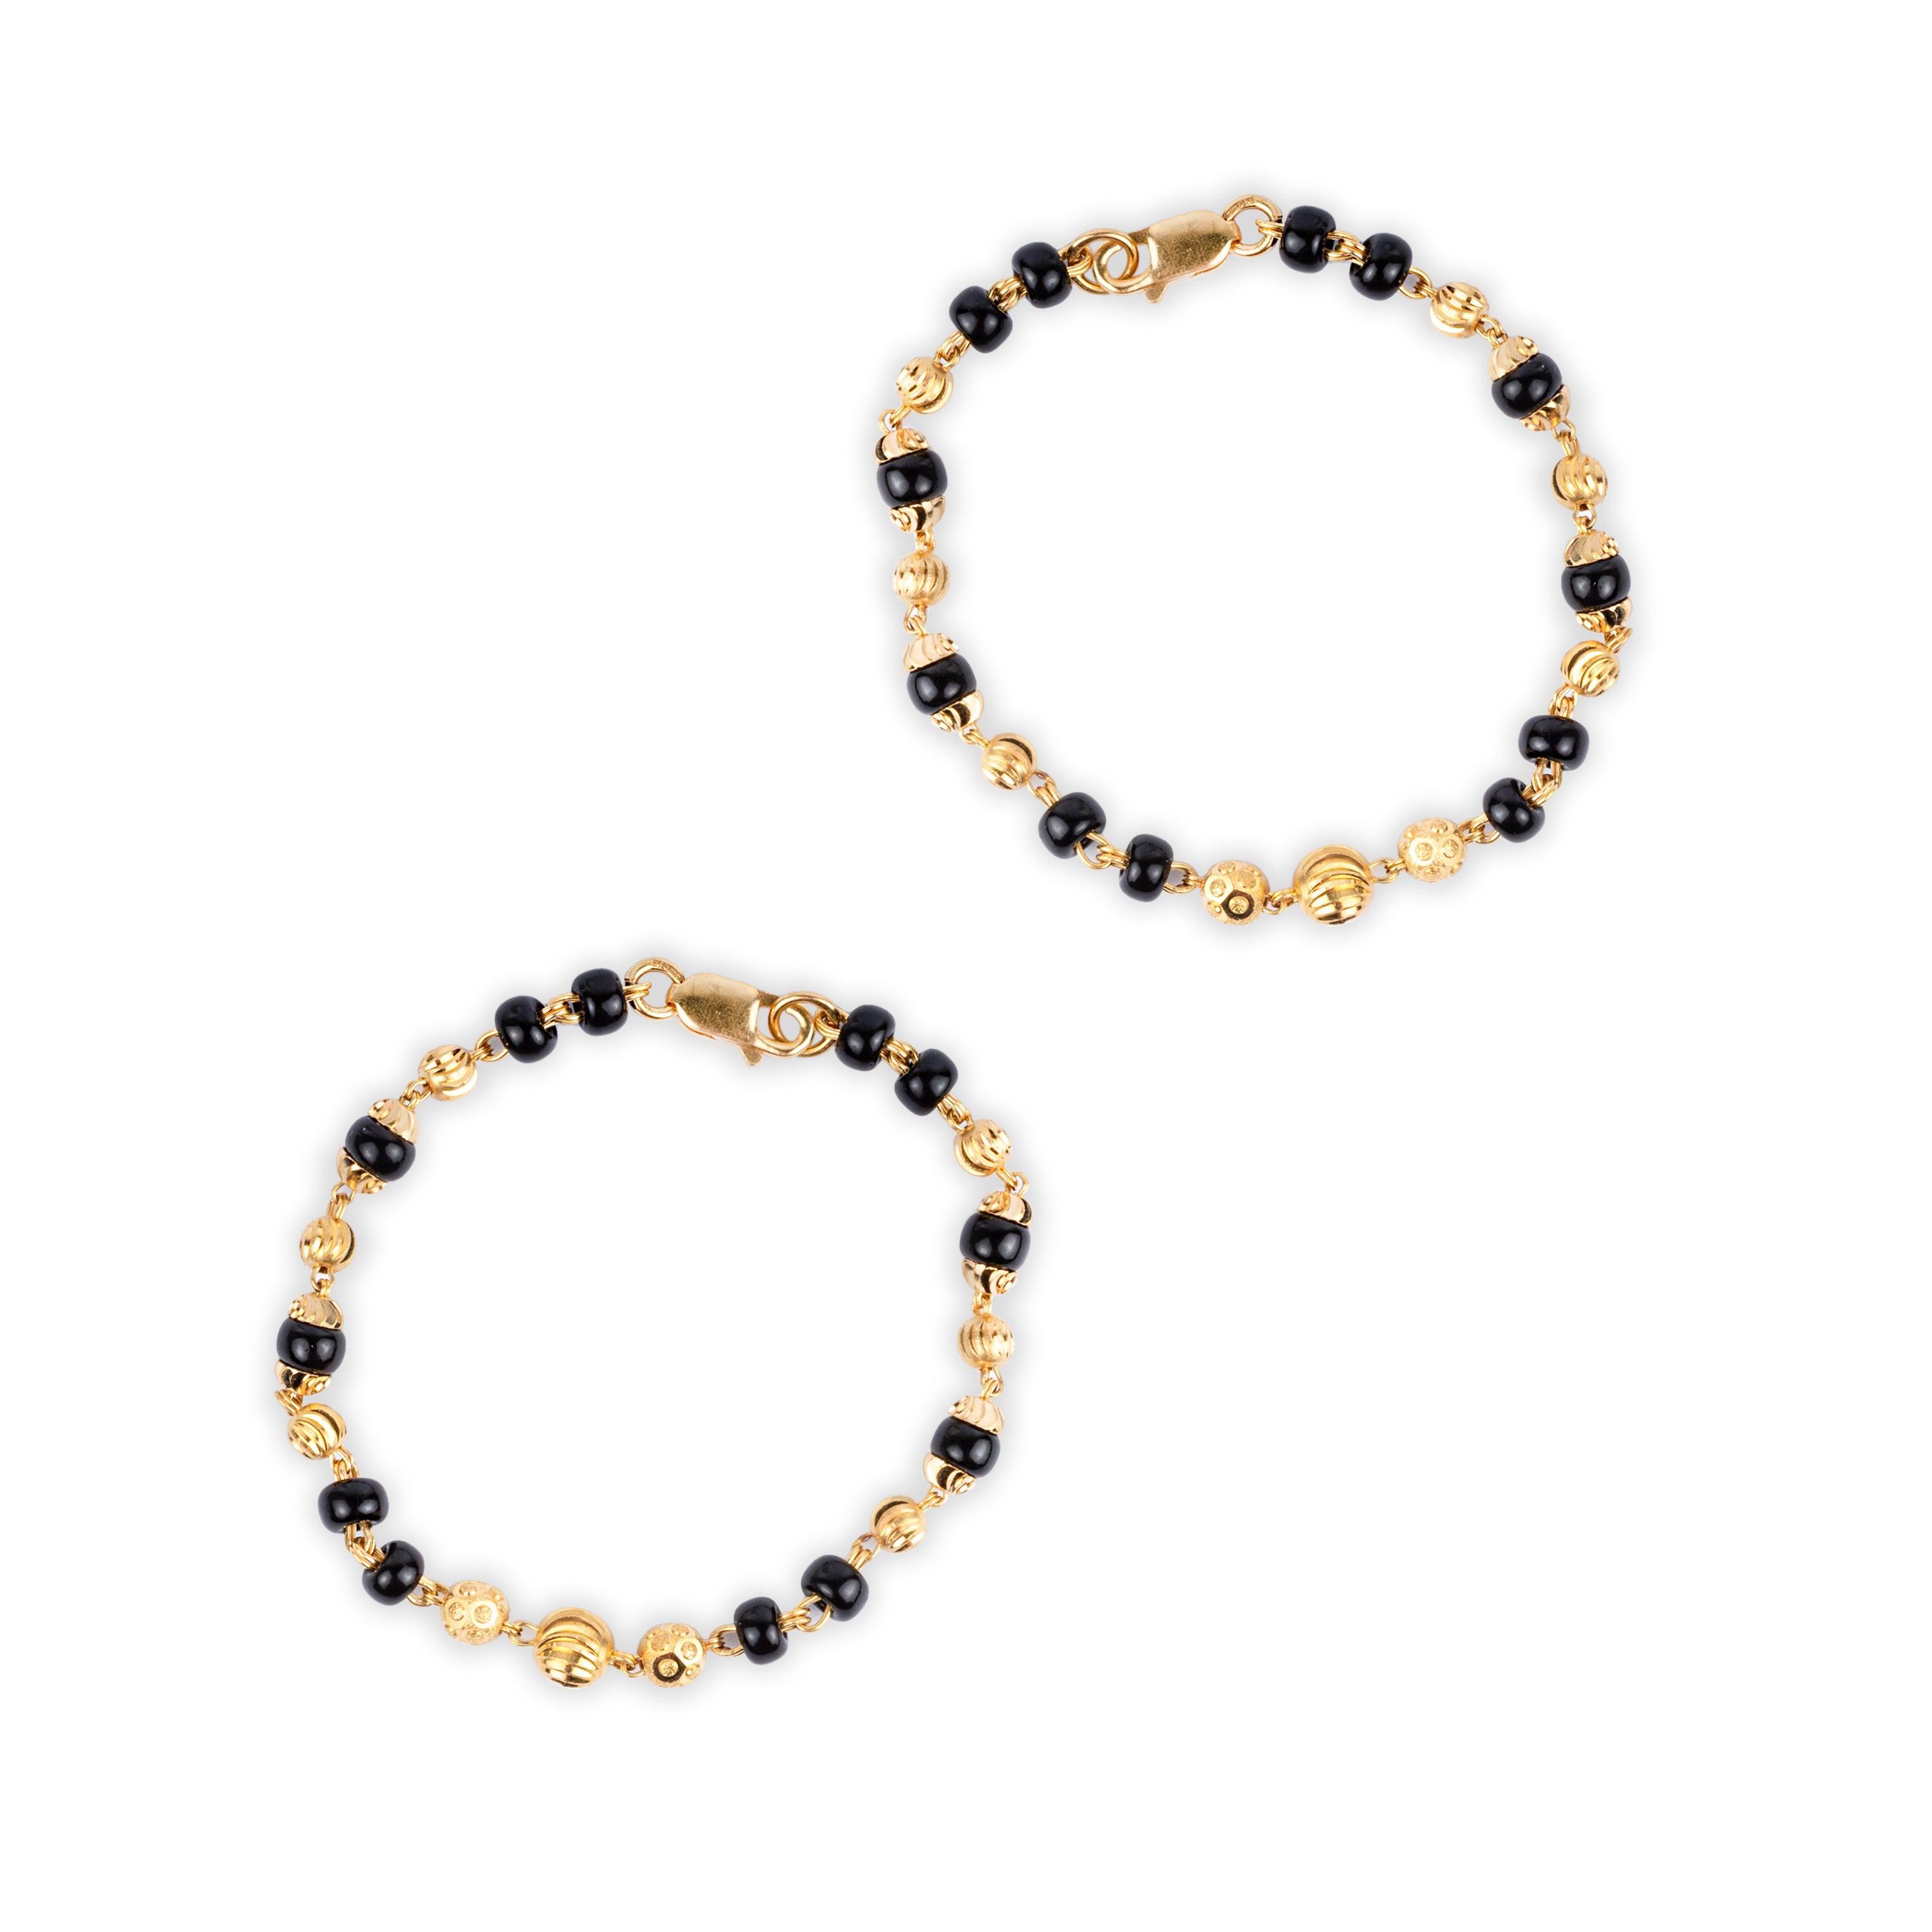 22ct Gold Black Bead Children's Bracelets with Lobster Clasp CBR-8095 - Minar Jewellers